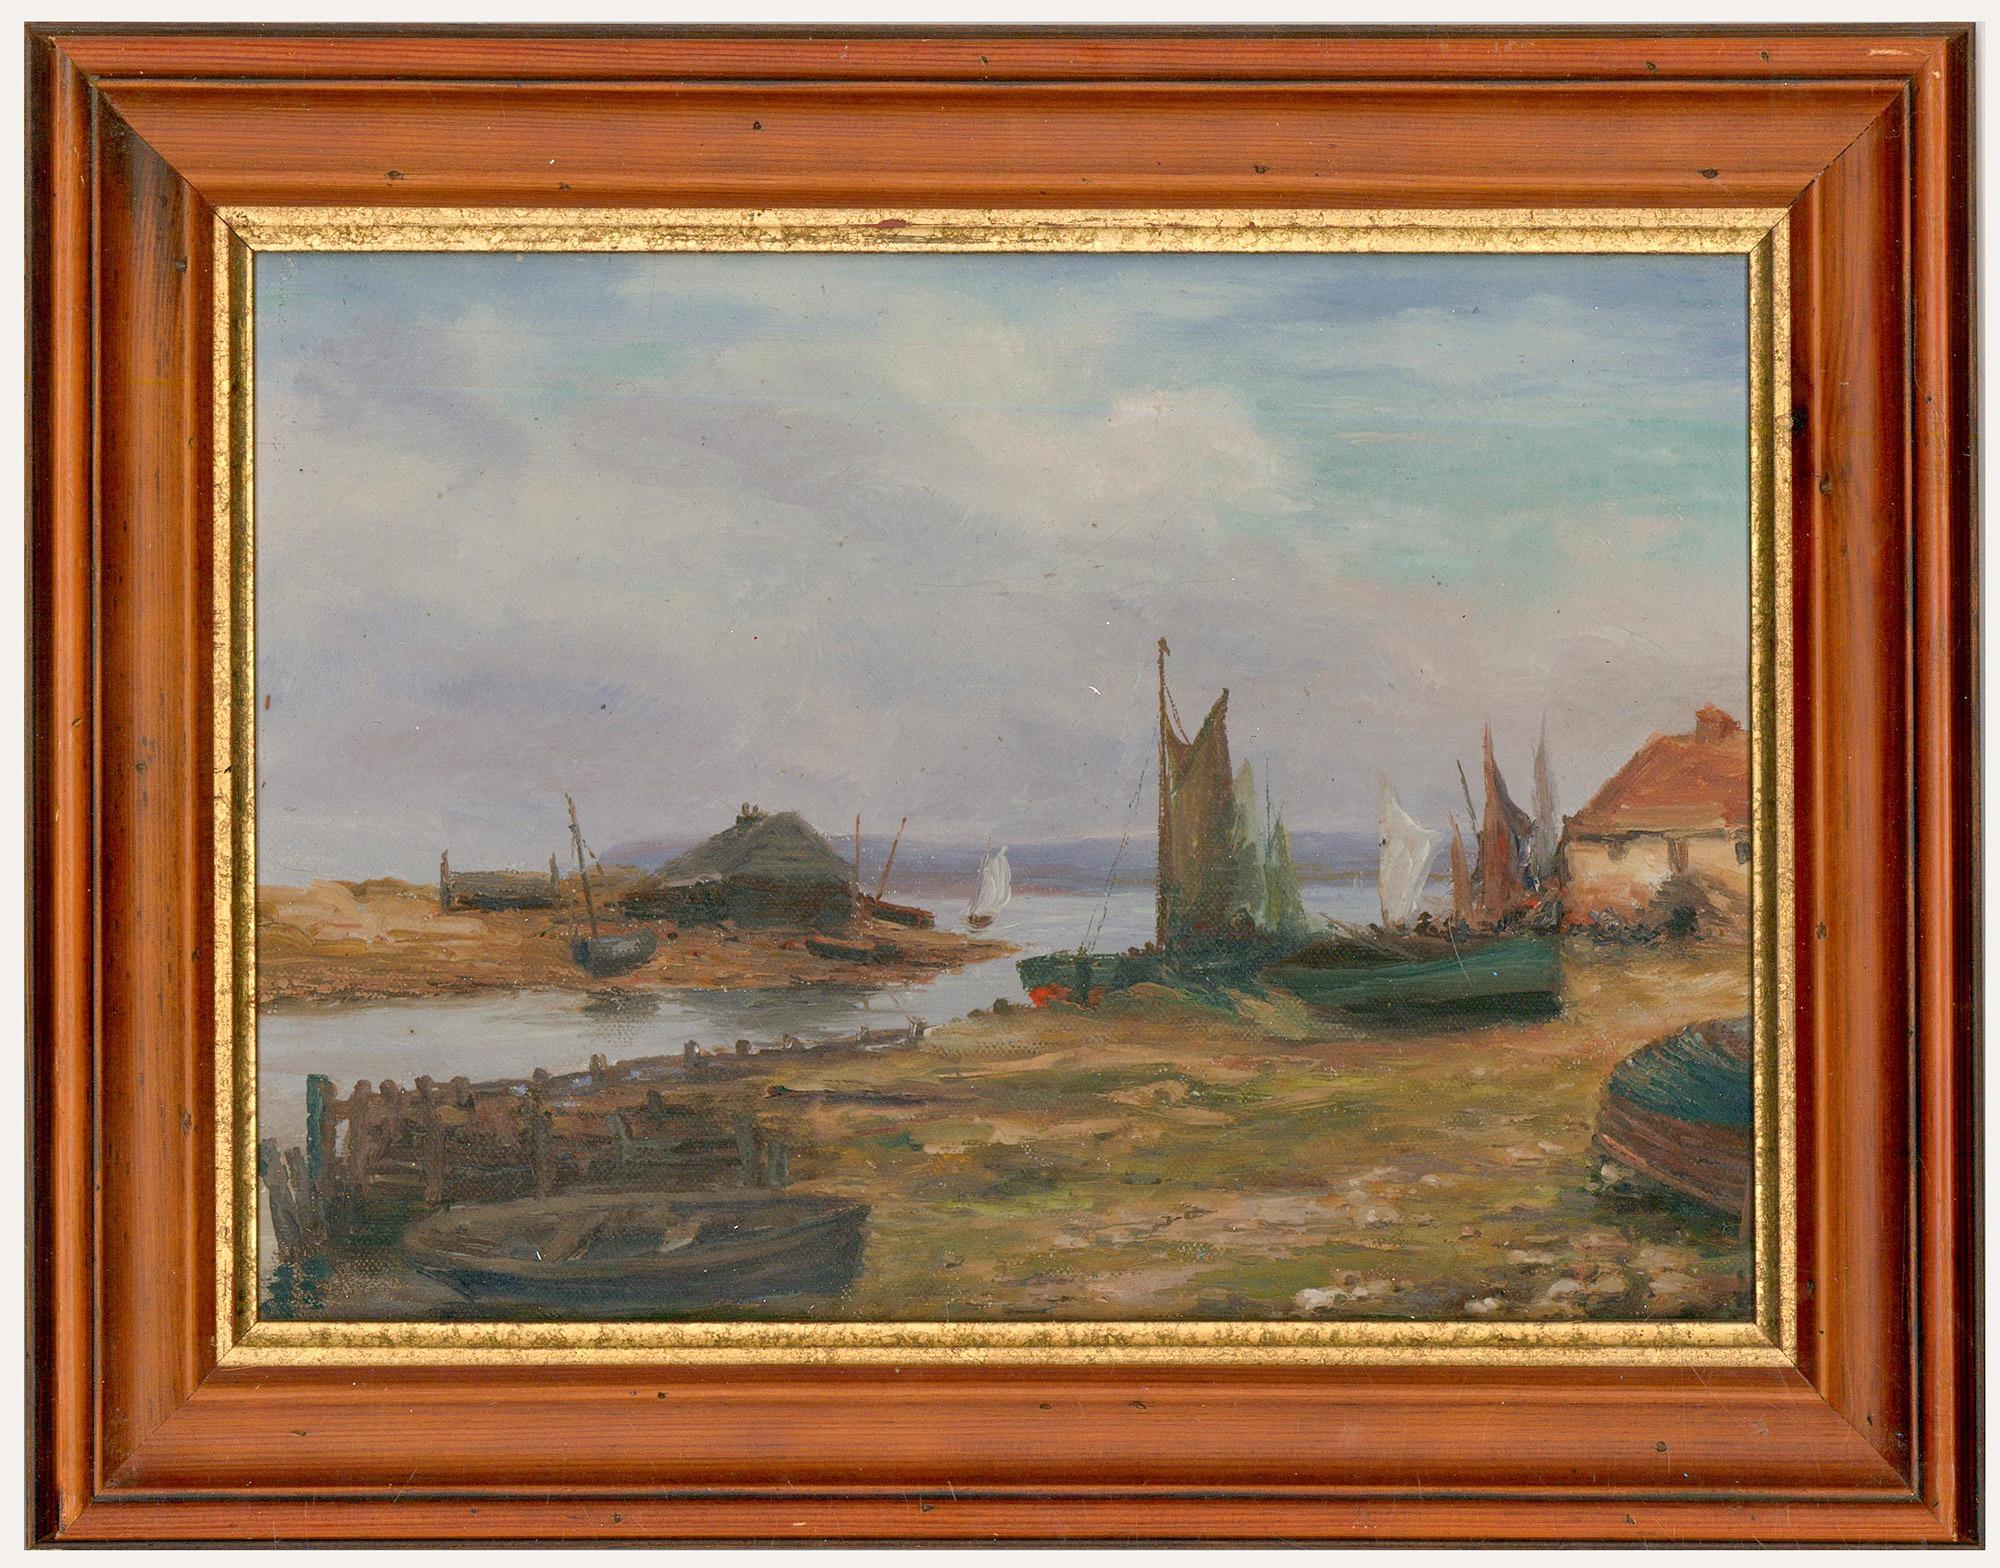 Unknown Figurative Painting - A E Scott - Framed Early 20th Century Oil, Mudeford